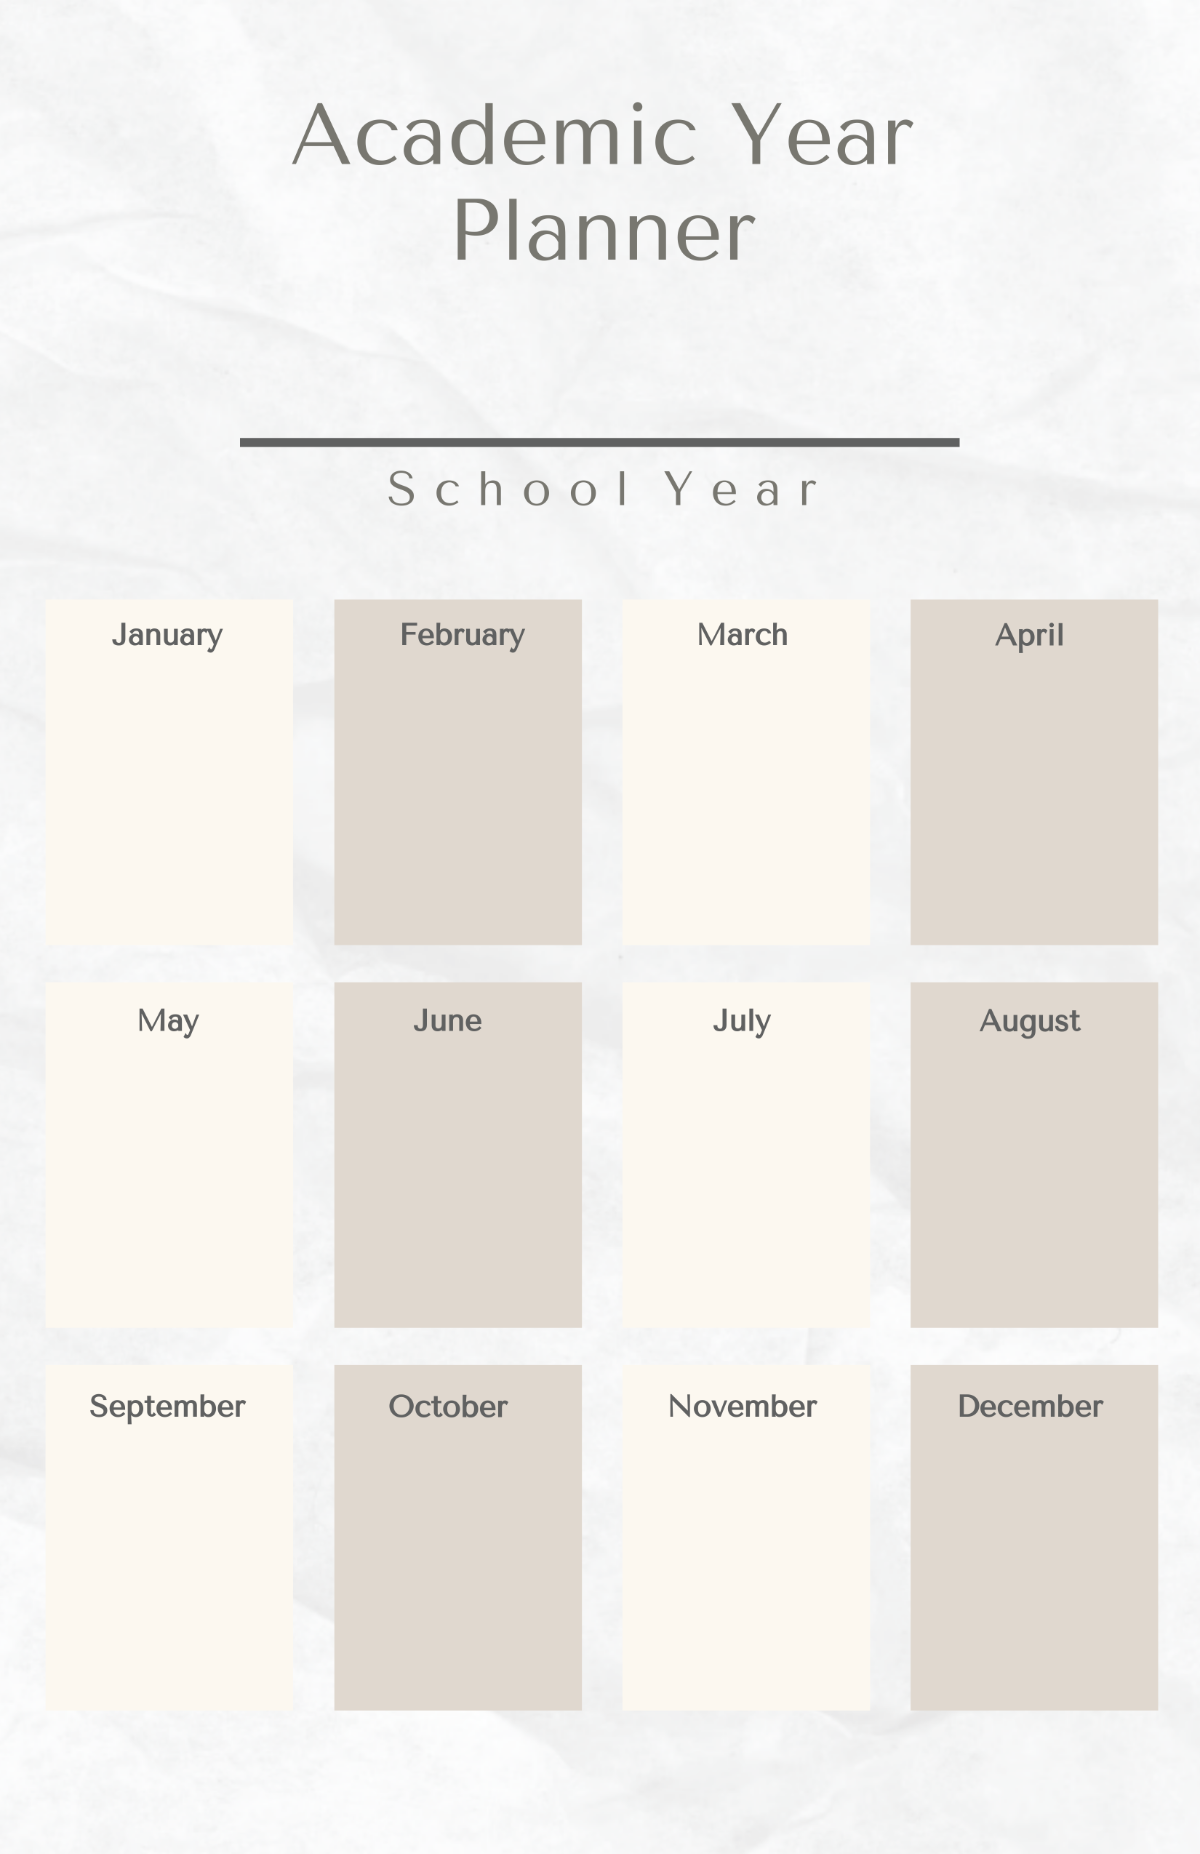 Academic Year Planner Poster